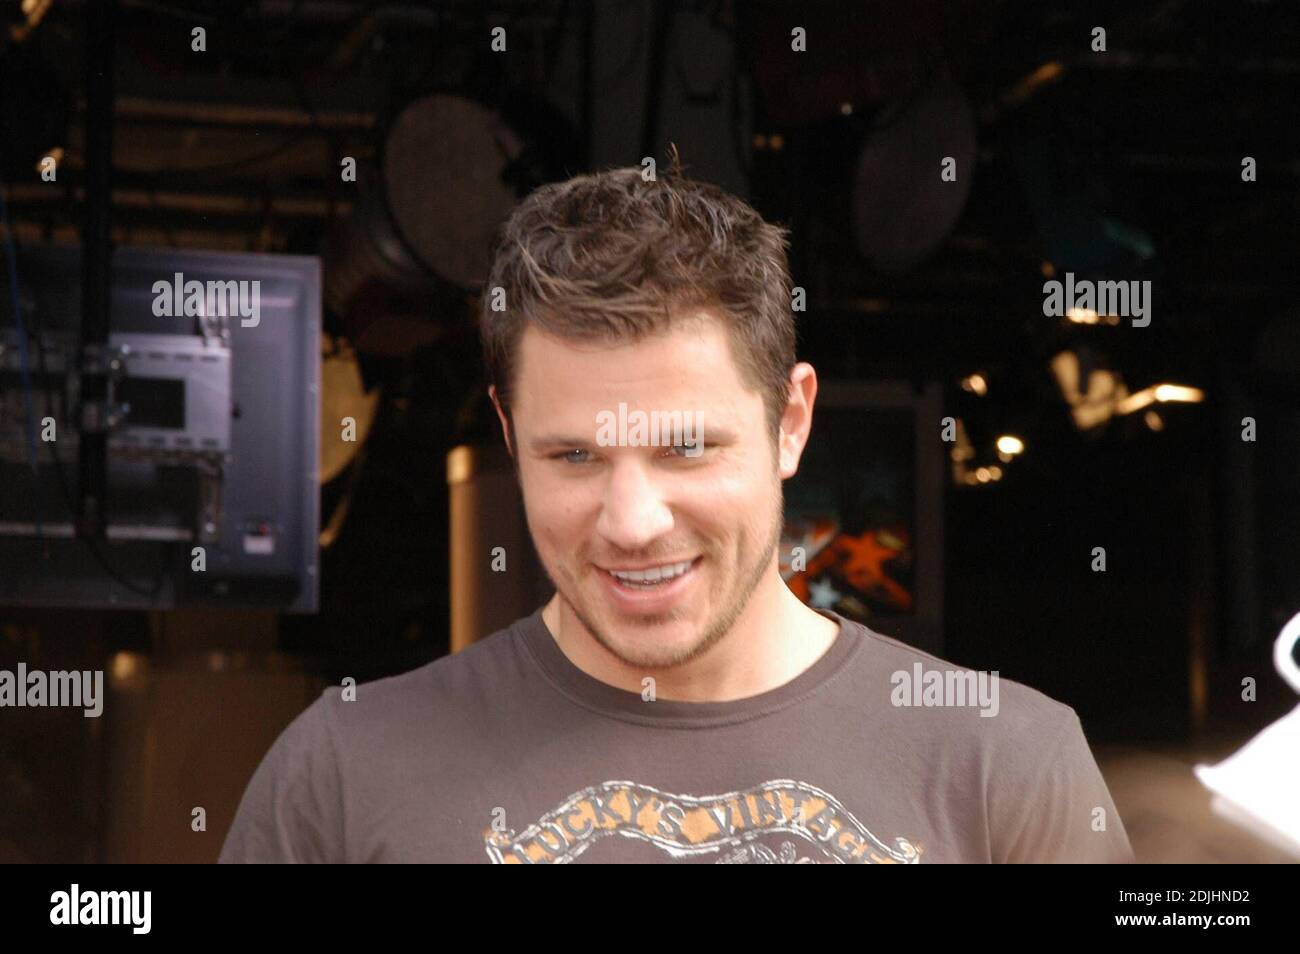 Nick Lachey at Much Music Awards for Much On Demand in the Chum-City Building, Toronto, Ontario, Canada. June 19 2006 Stock Photo